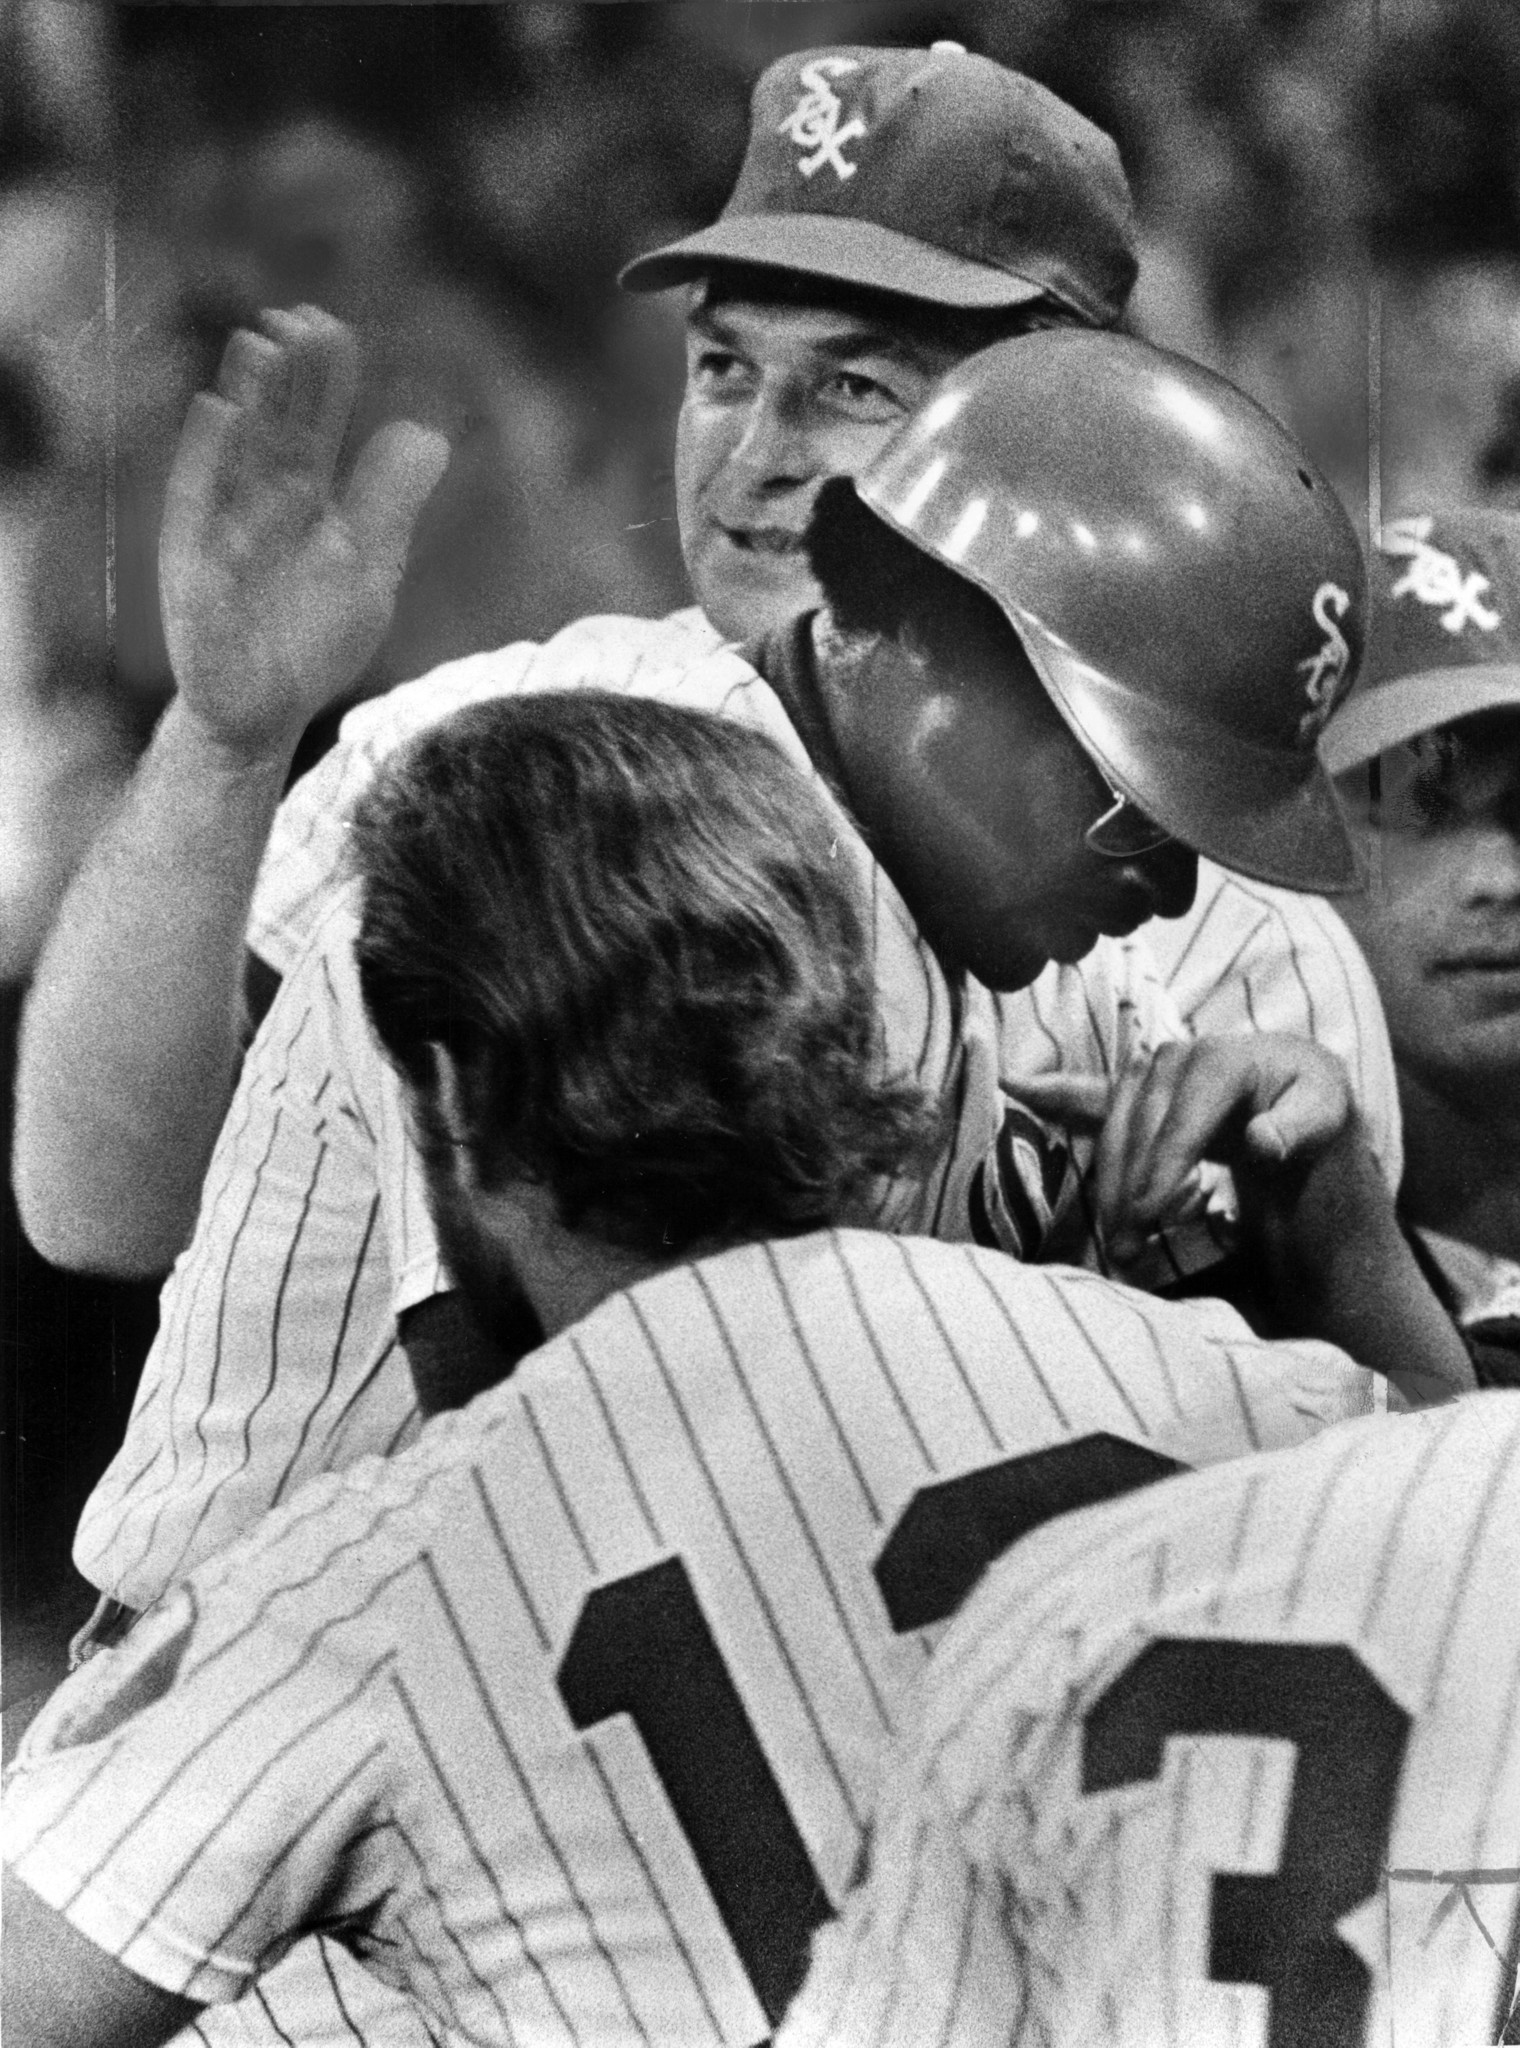 Dick Allen, 1972 AL MVP With White Sox, Dies at 78, Family Says – NBC  Chicago